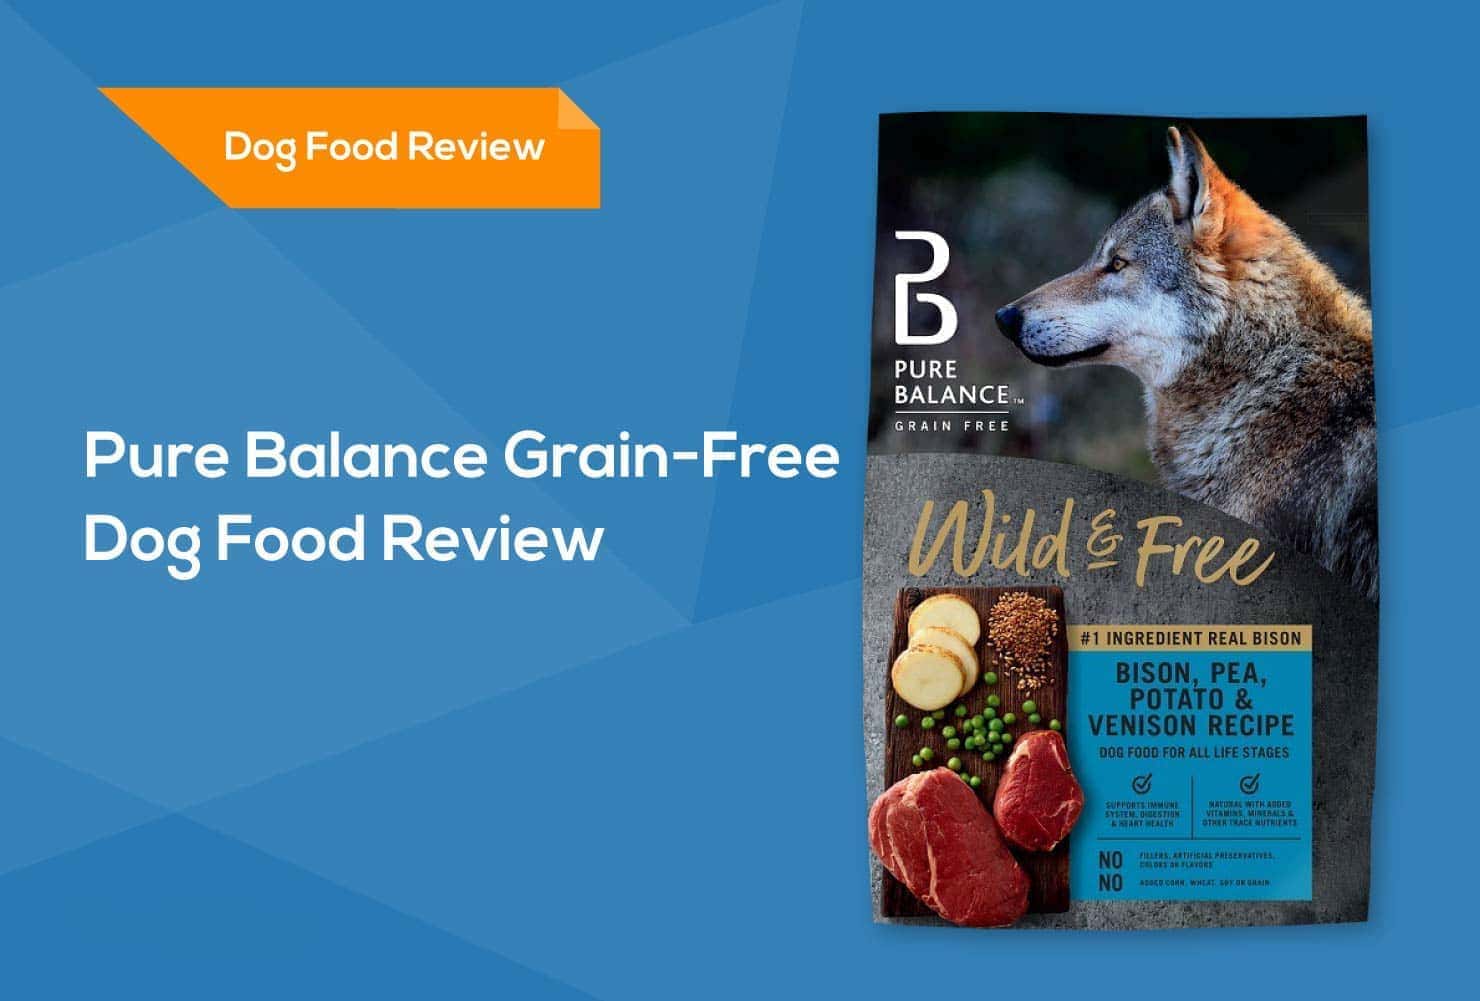 Feeding Your Furry Friend: The Benefits of Pure Balance Pro Dog Food